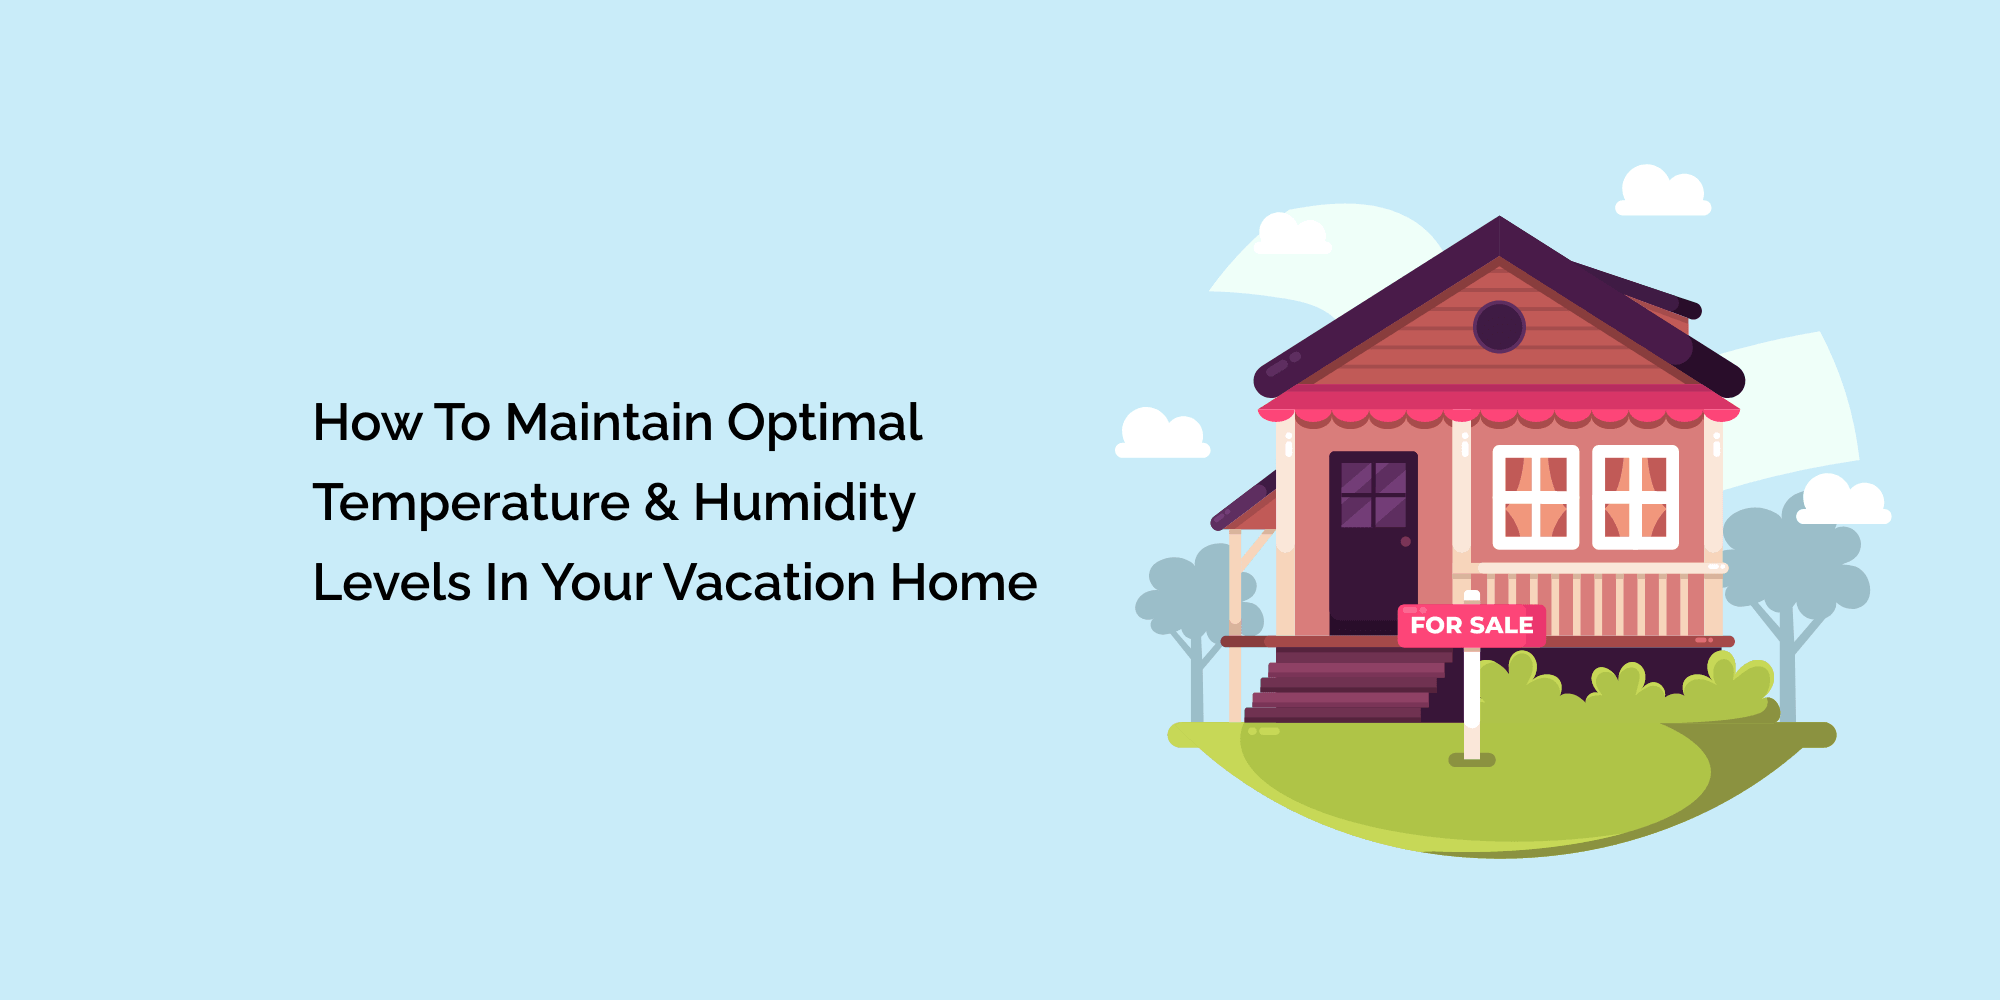 How to Maintain Optimal Temperature & Humidity Levels in Your Vacation Home